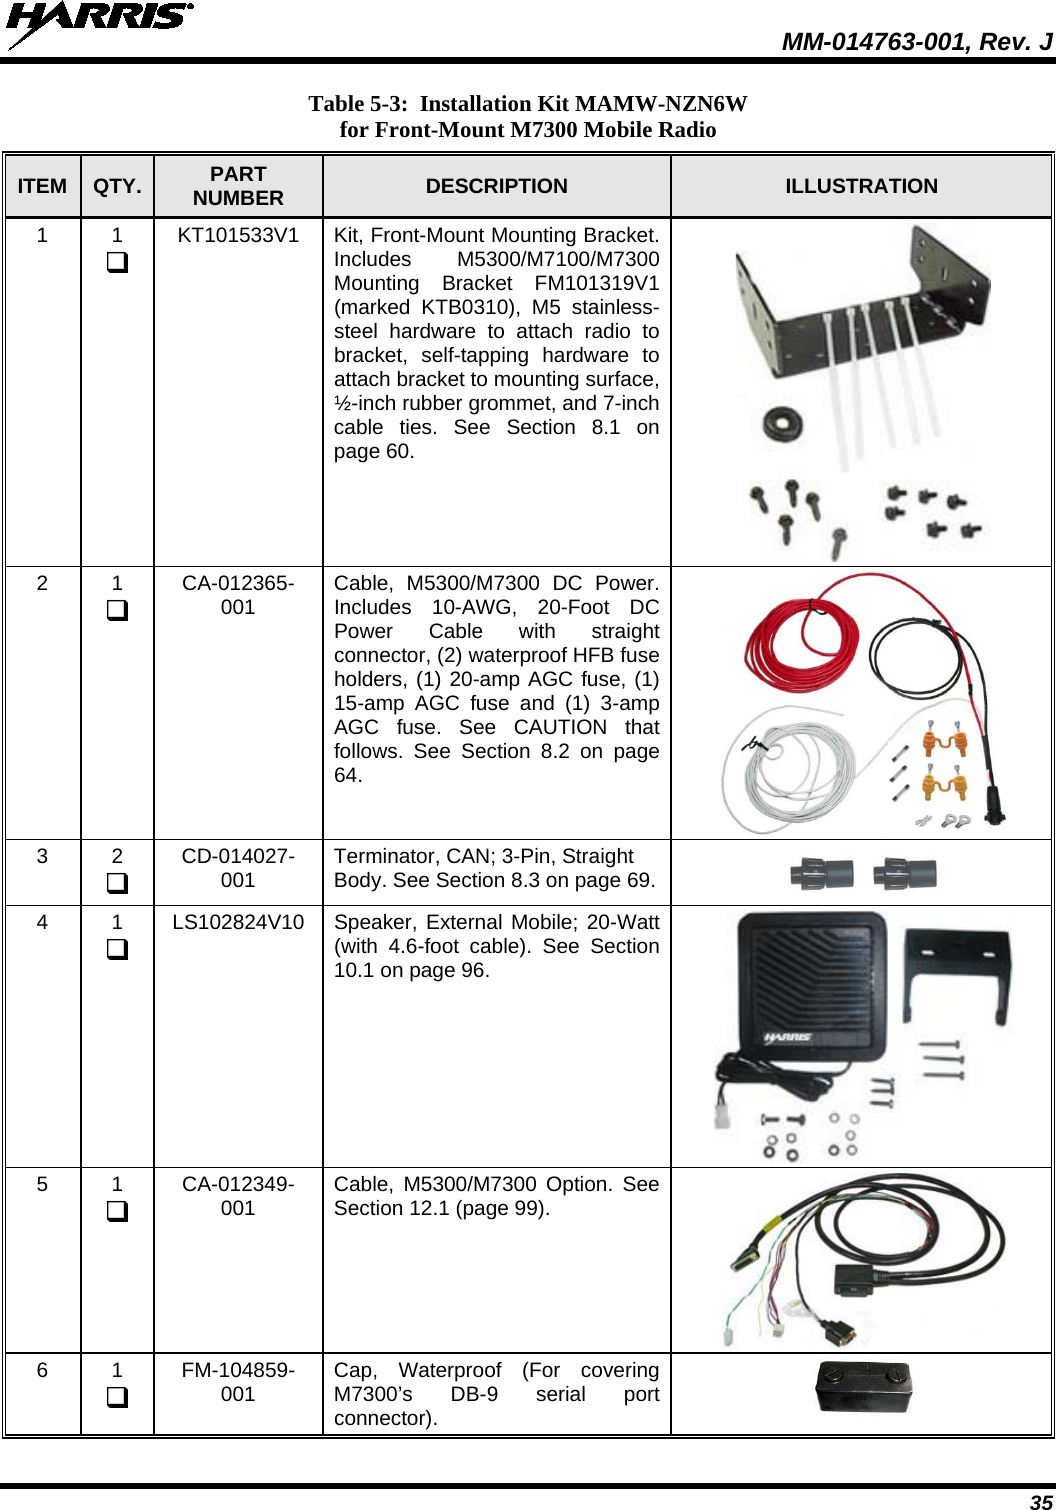  MM-014763-001, Rev. J 35 Table 5-3:  Installation Kit MAMW-NZN6W for Front-Mount M7300 Mobile Radio ITEM QTY. PART NUMBER DESCRIPTION  ILLUSTRATION 1  1  KT101533V1 Kit, Front-Mount Mounting Bracket. Includes  M5300/M7100/M7300 Mounting Bracket FM101319V1 (marked KTB0310), M5 stainless-steel hardware to attach radio to bracket, self-tapping hardware to attach bracket to mounting surface, ½-inch rubber grommet, and 7-inch cable ties. See Section 8.1 on page 60.  2  1  CA-012365-001 Cable,  M5300/M7300 DC Power. Includes 10-AWG, 20-Foot DC Power Cable with straight connector, (2) waterproof HFB fuse holders, (1) 20-amp AGC fuse, (1) 15-amp AGC fuse and (1) 3-amp AGC fuse. See CAUTION that follows. See Section 8.2 on page 64.  3  2  CD-014027-001 Terminator, CAN; 3-Pin, Straight Body. See Section 8.3 on page 69.       4  1  LS102824V10 Speaker, External Mobile; 20-Watt (with 4.6-foot cable).  See Section 10.1 on page 96.  5  1  CA-012349-001 Cable, M5300/M7300 Option. See Section 12.1 (page 99).  6  1  FM-104859-001 Cap, Waterproof (For covering M7300’s DB-9 serial port connector).    